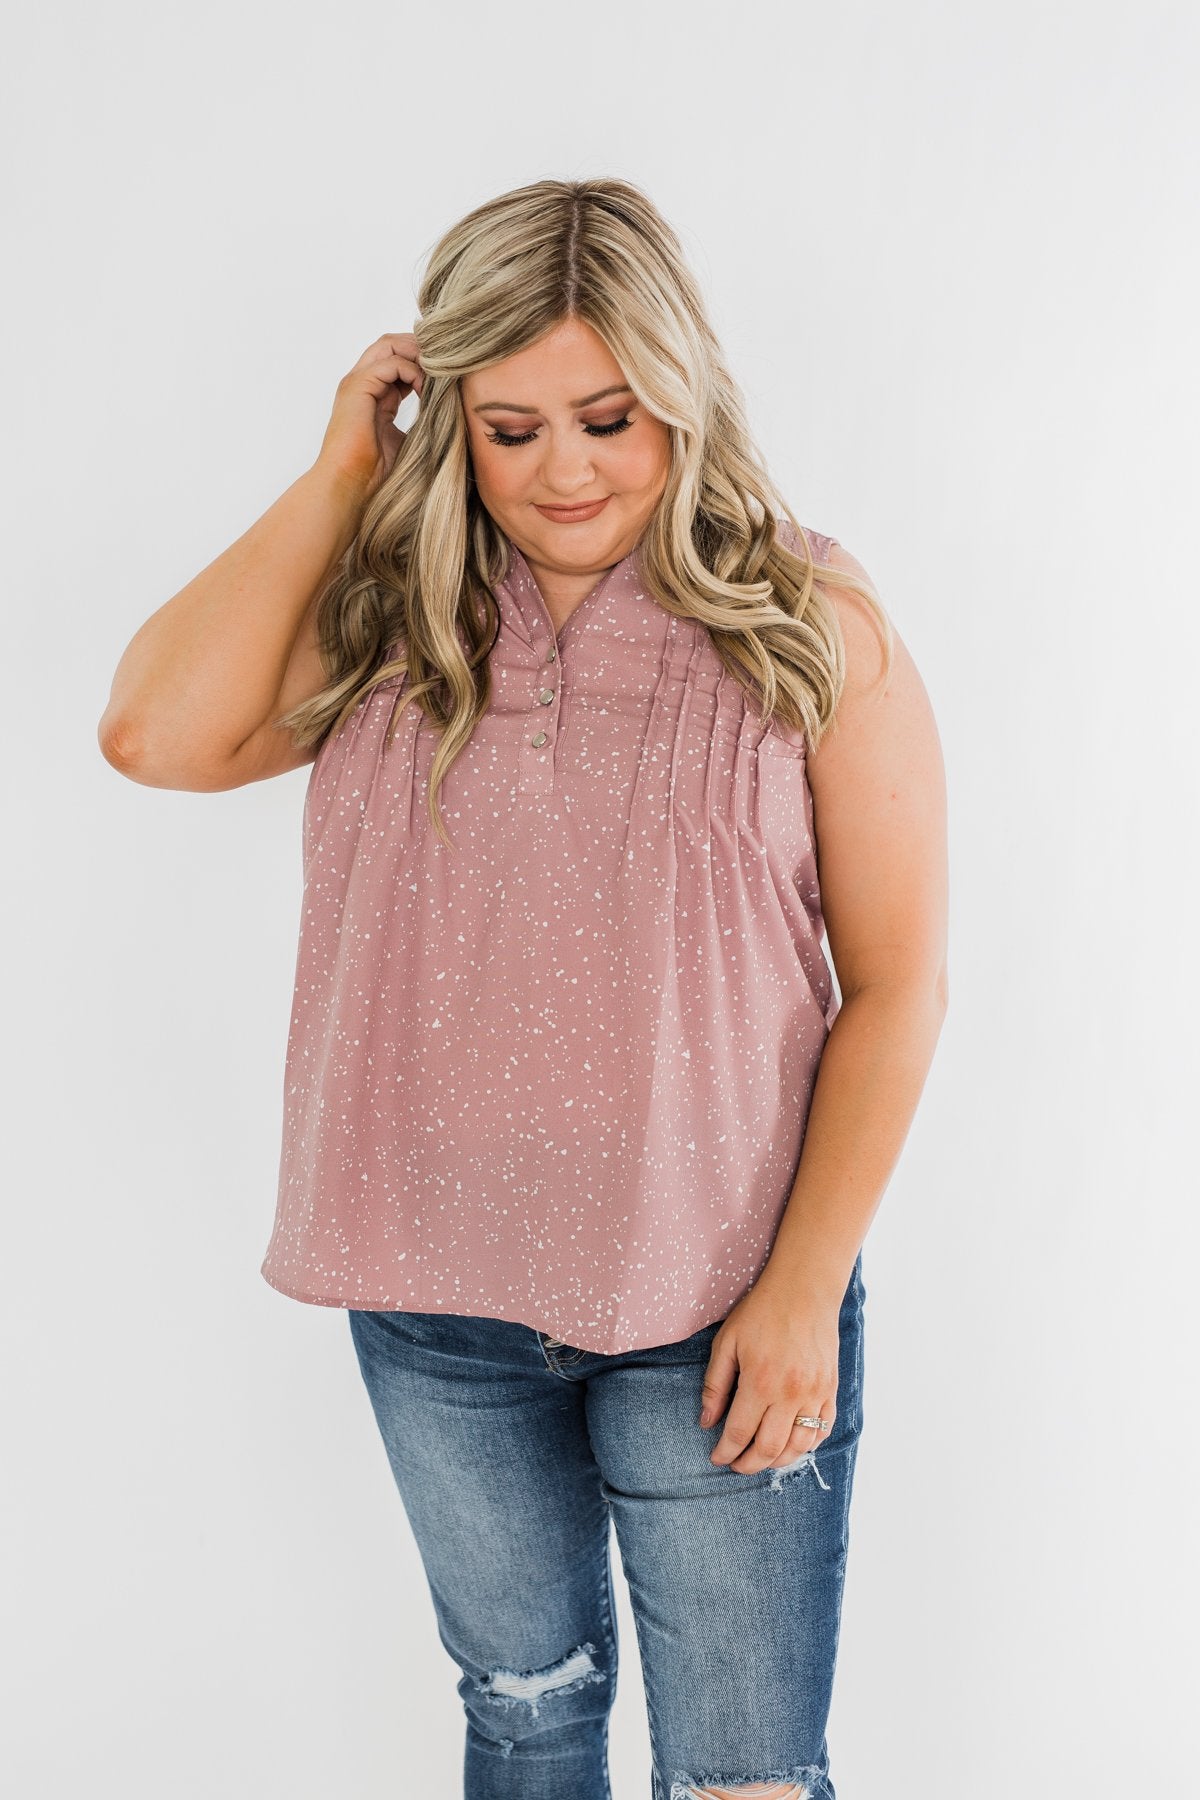 Fond Of You Speckled Sleeveless Blouse- Mauve